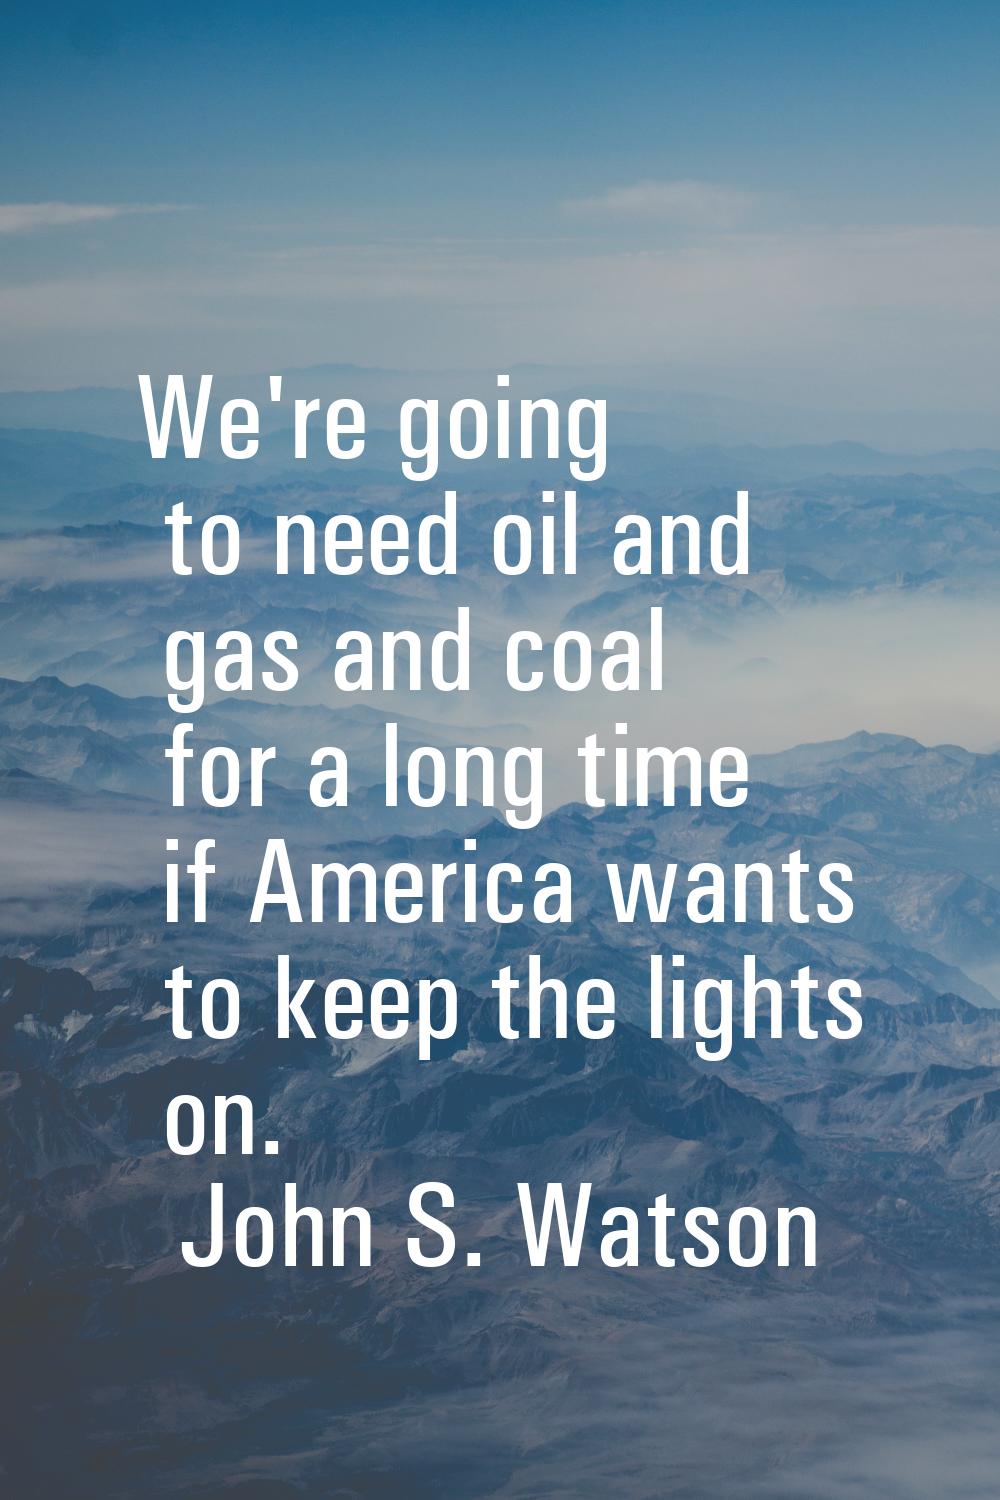 We're going to need oil and gas and coal for a long time if America wants to keep the lights on.